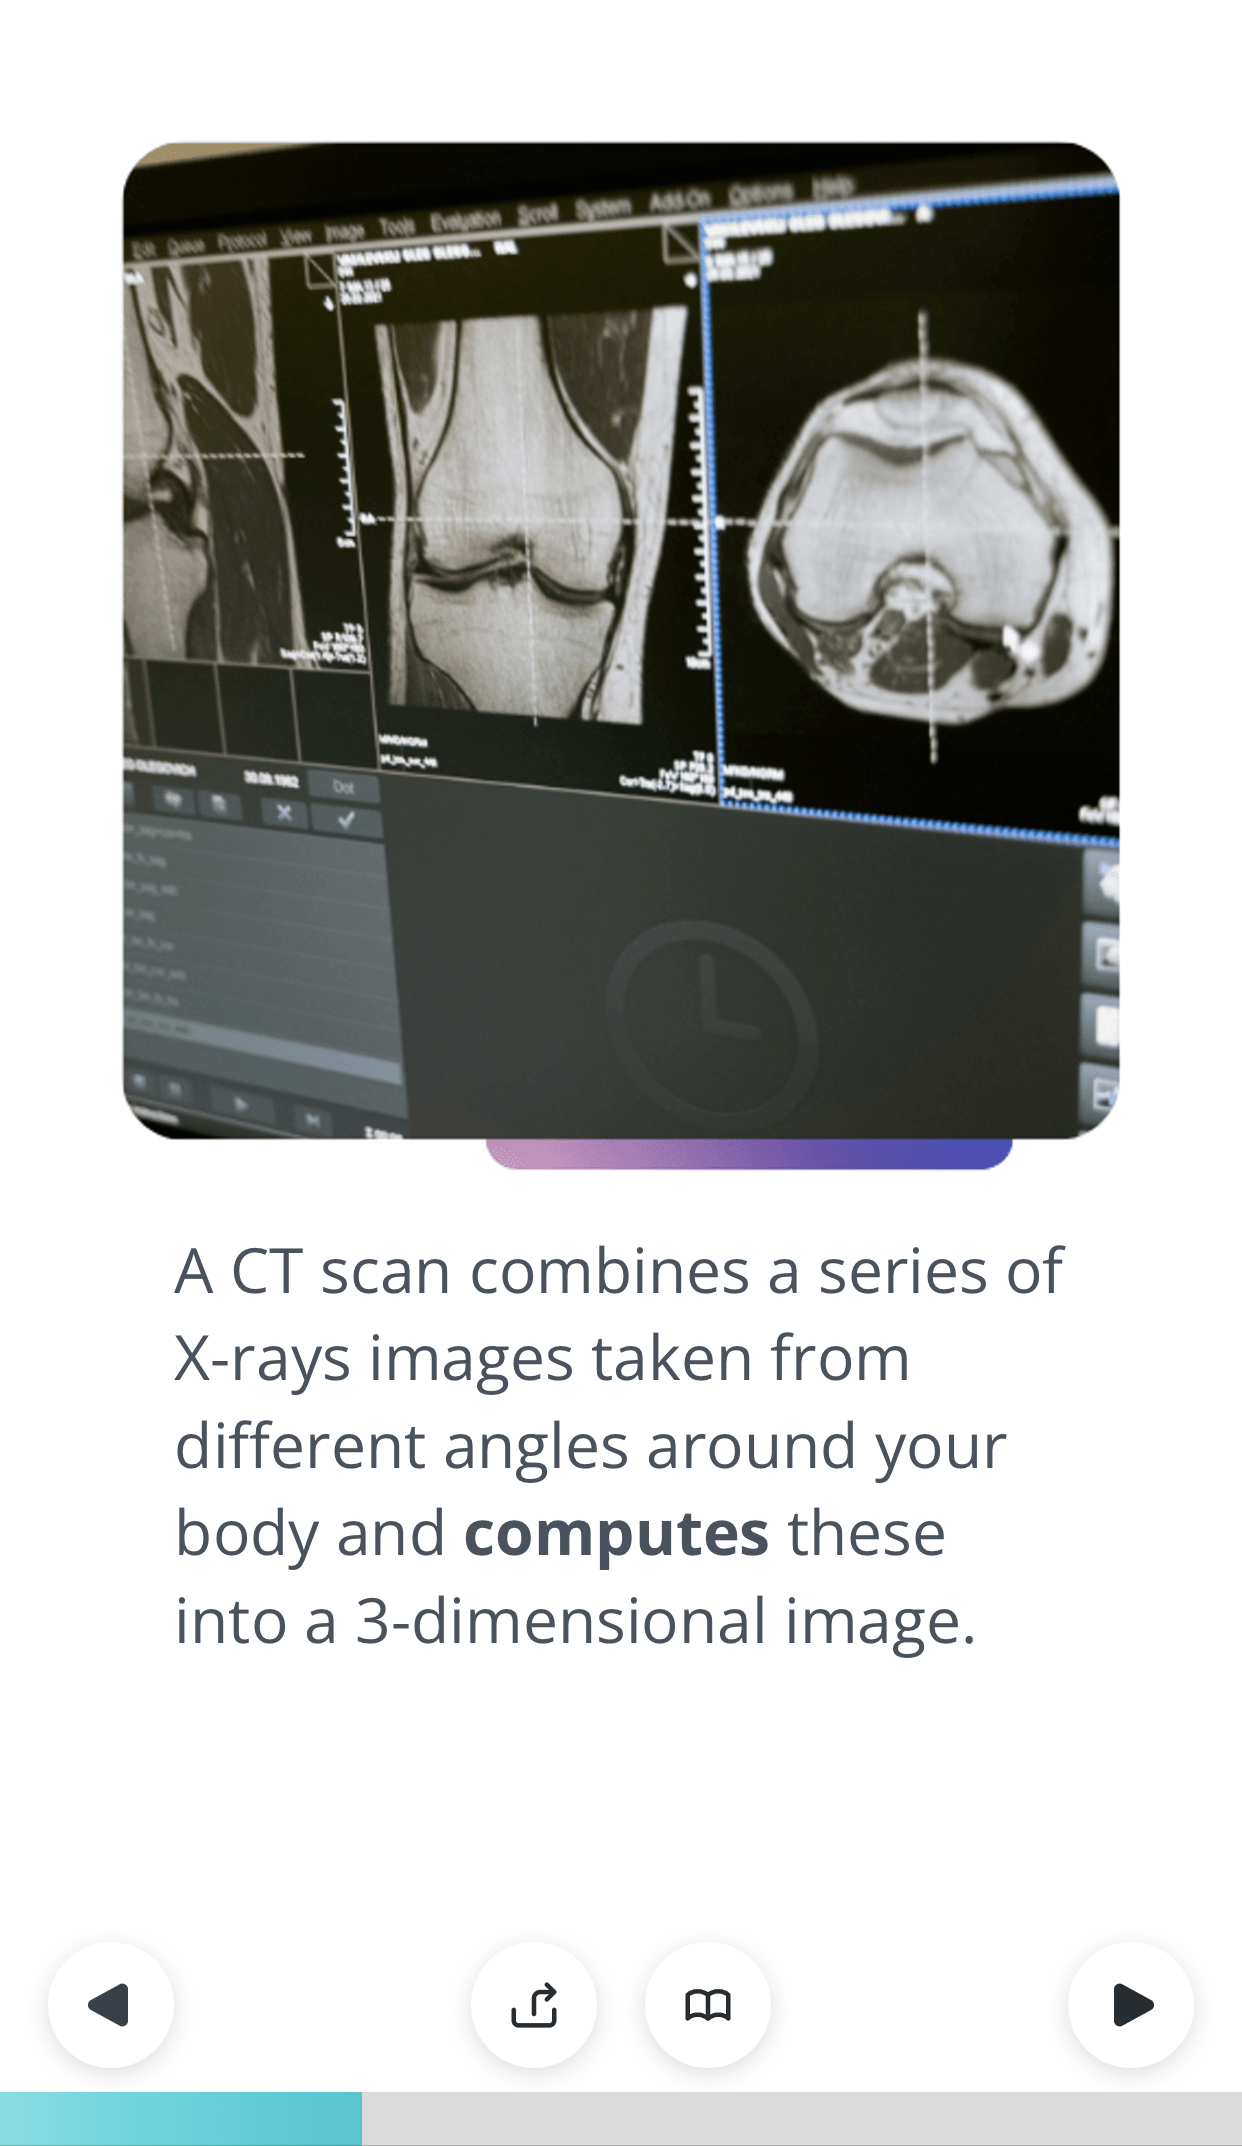 A CT scan combines a series of X-rays images taken from different angles around your body and computes these into a dimensional image.